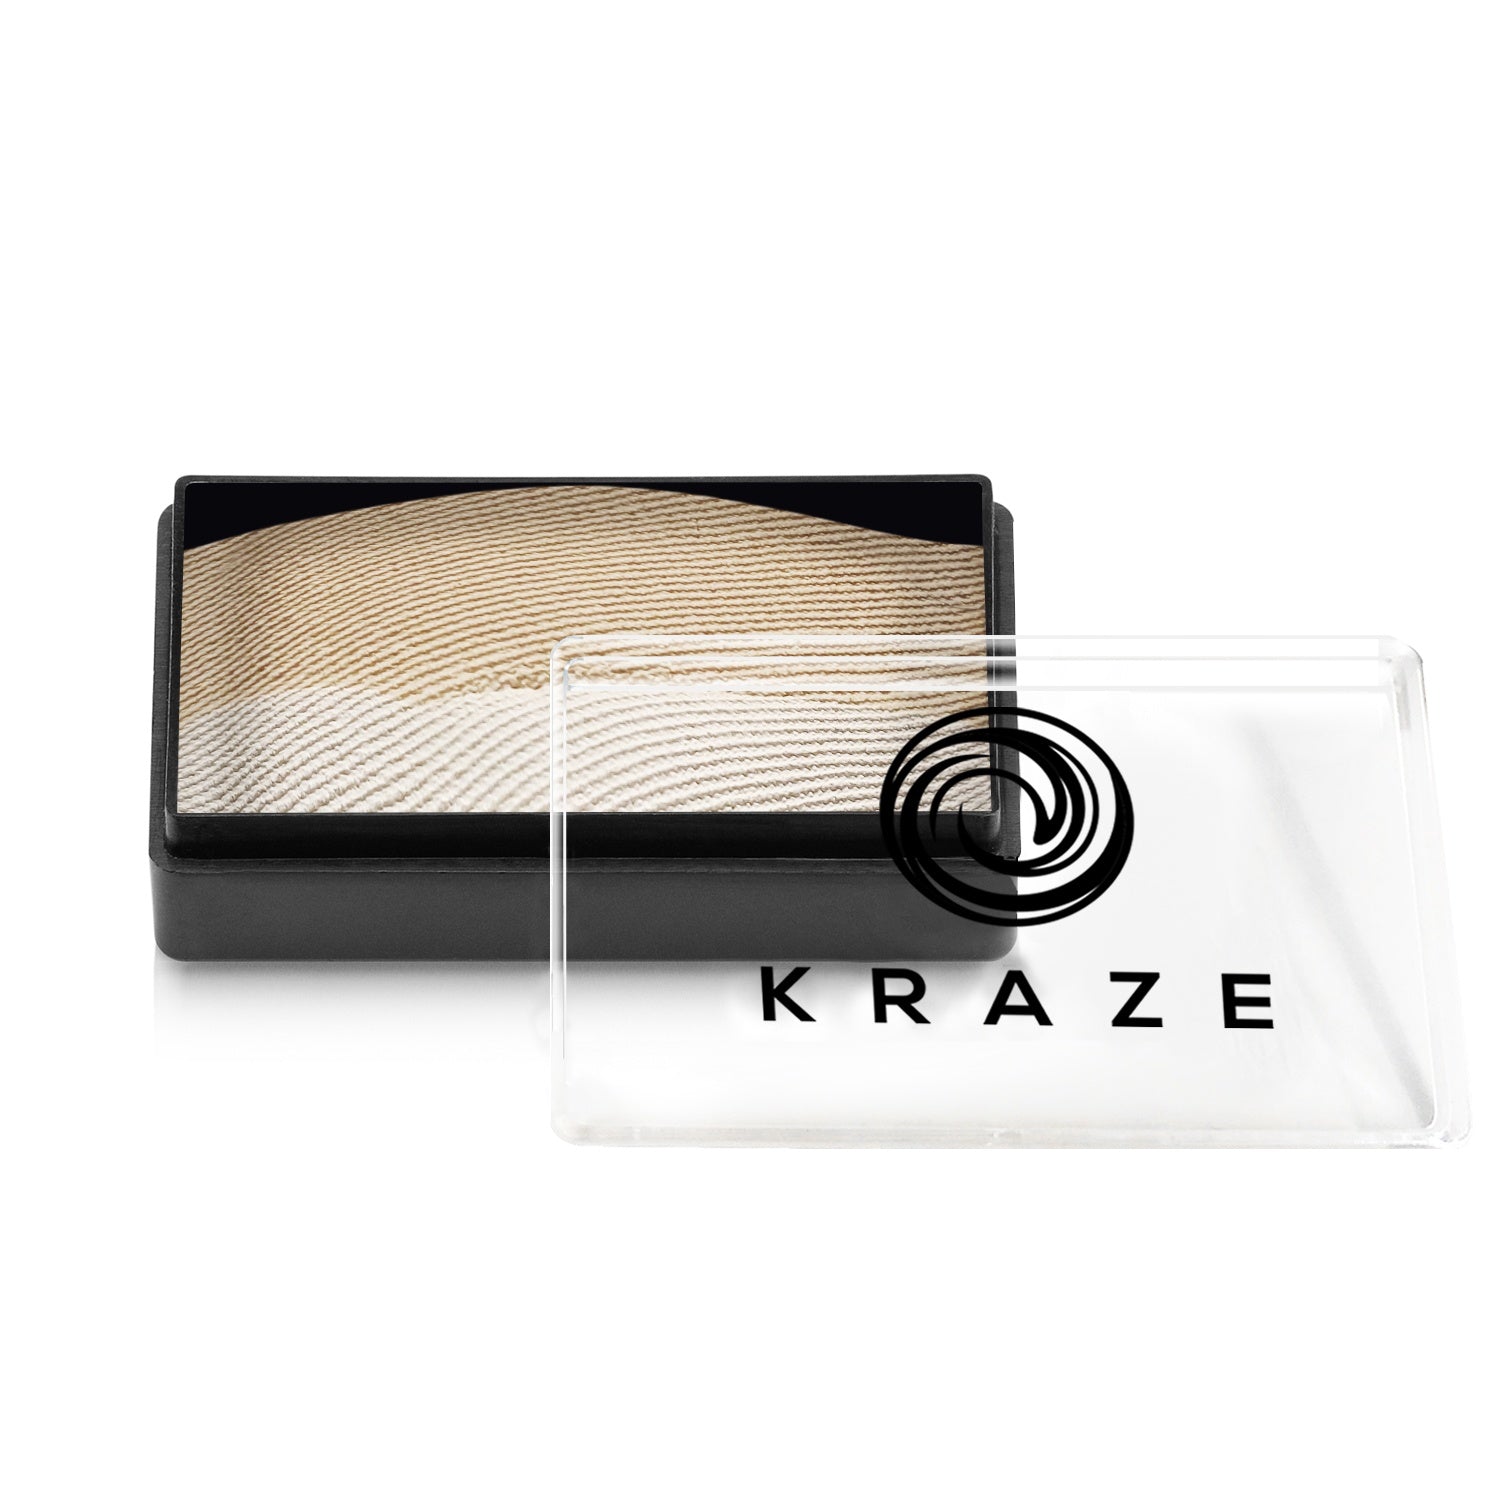 Kraze Dome Stroke - 25 gm - Pure Ghost Rose by Bianca Hannah